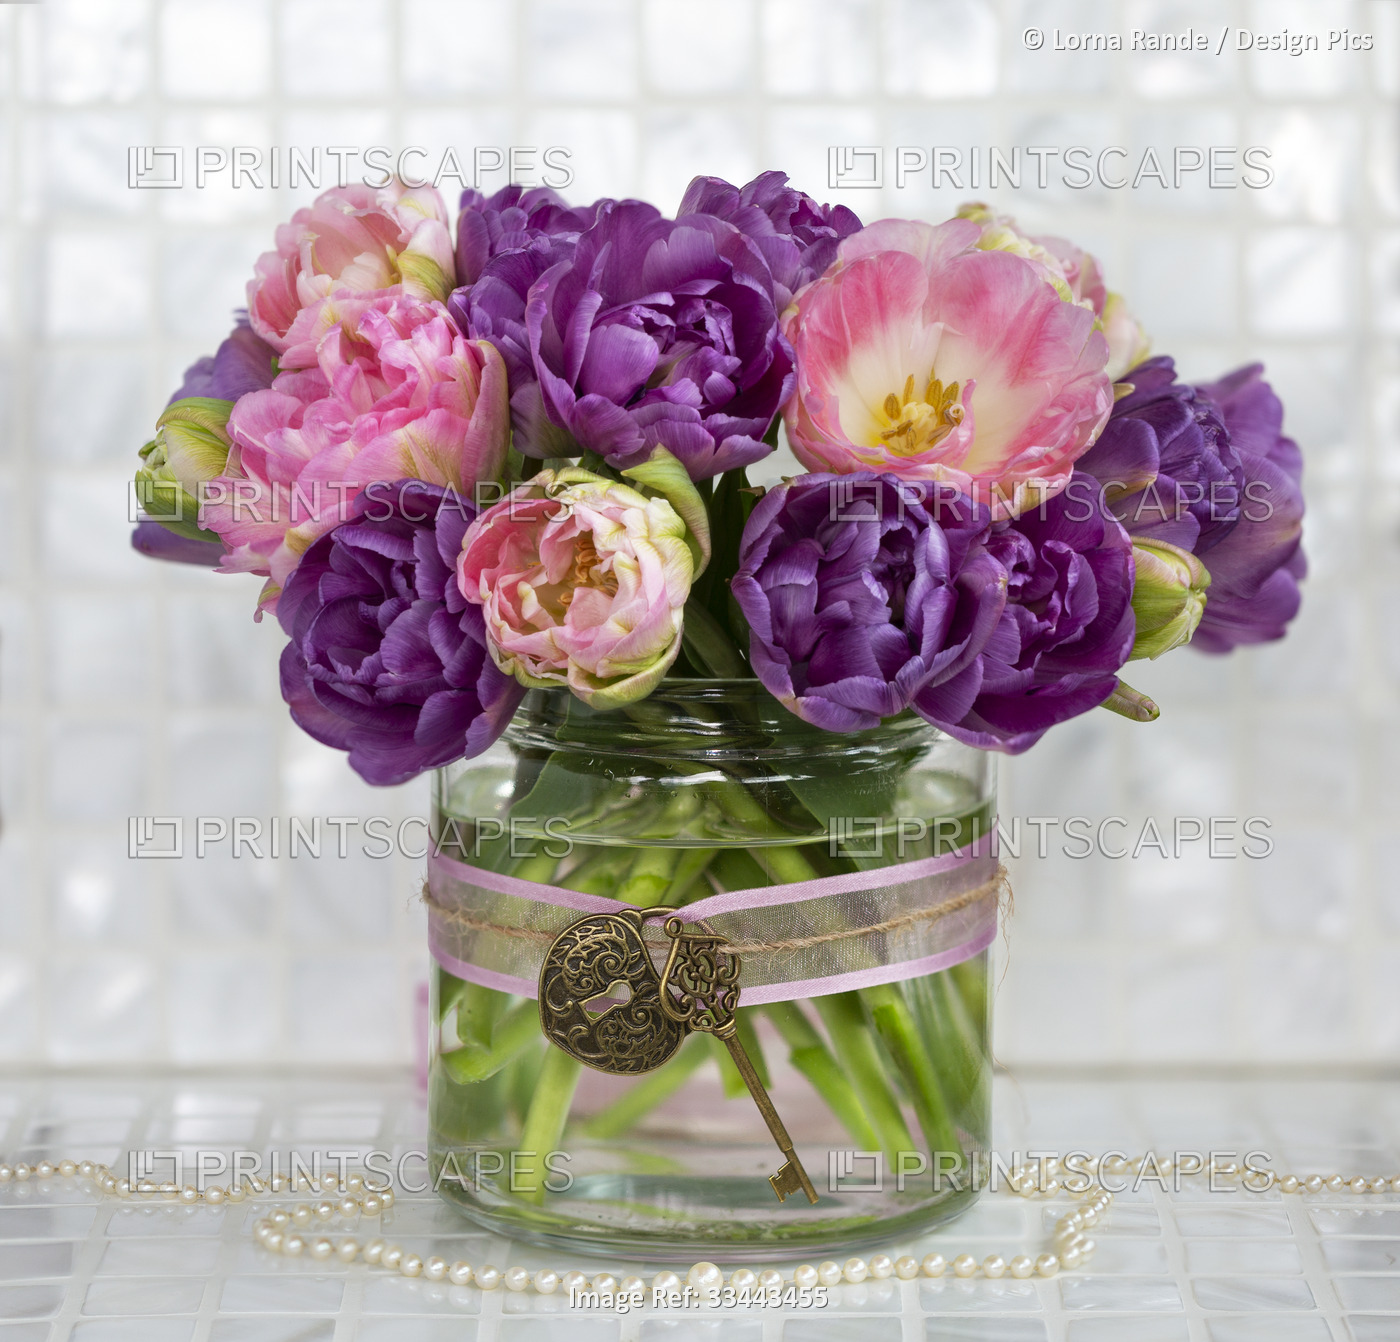 Still life shot of a vase with purple and pink parrot tulips; Studio